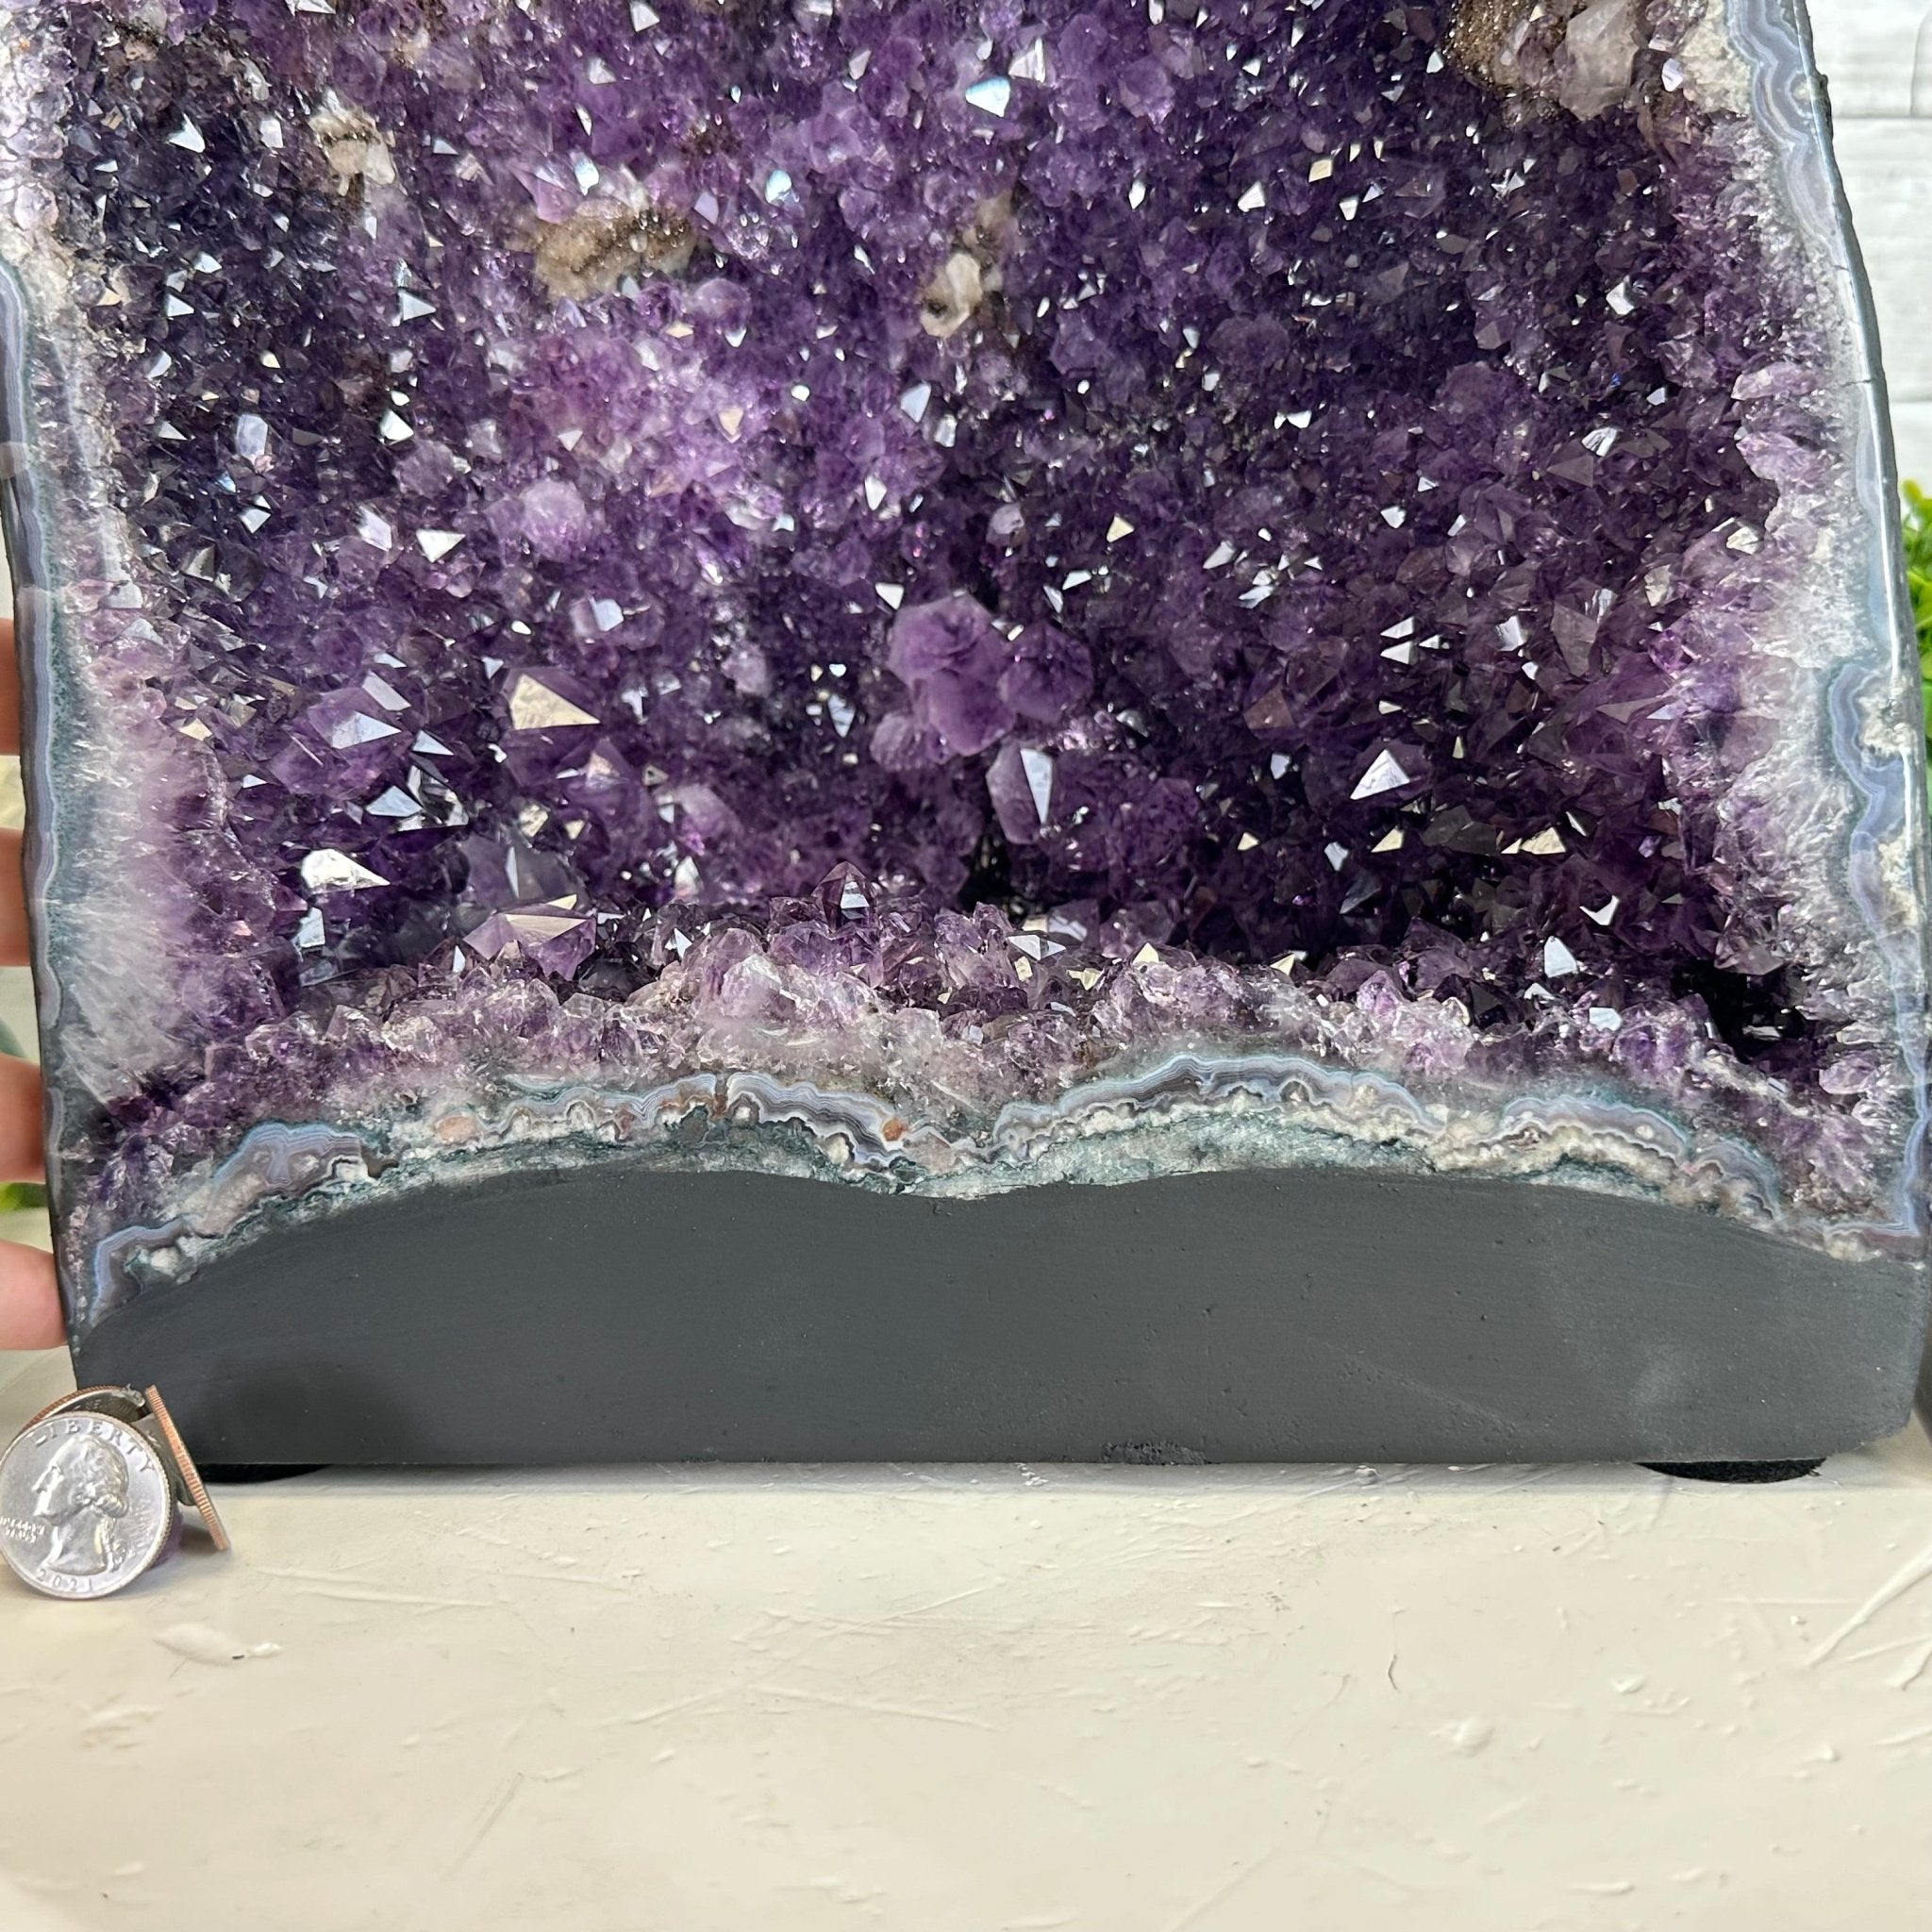 Quality Brazilian Amethyst Cathedral, 30.1 lbs & 12.3" Tall, #5601 - 1404 - Brazil GemsBrazil GemsQuality Brazilian Amethyst Cathedral, 30.1 lbs & 12.3" Tall, #5601 - 1404Cathedrals5601 - 1404